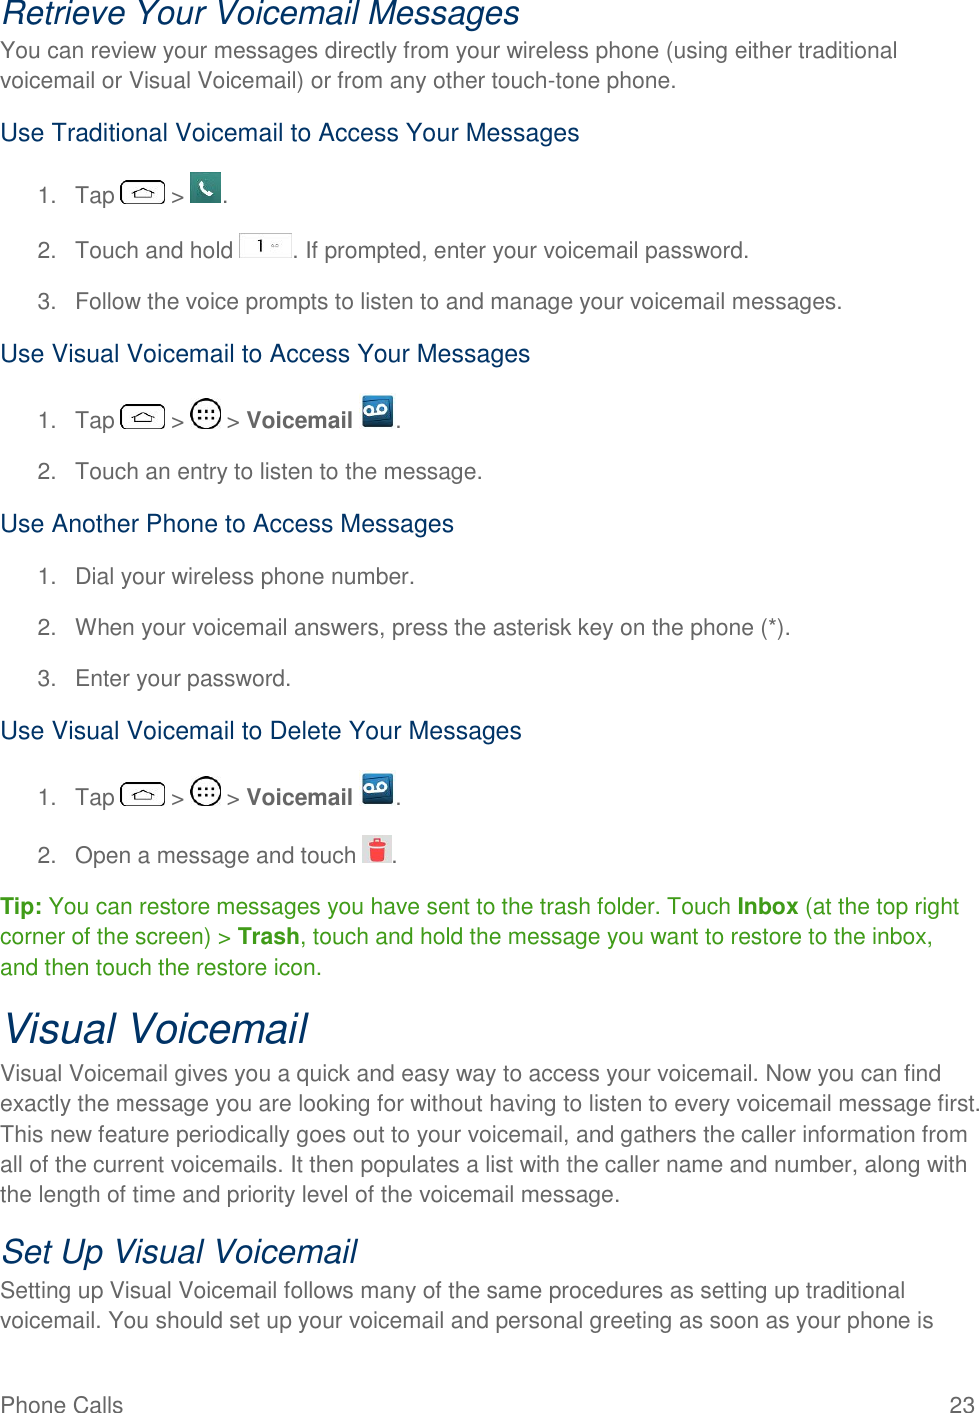 Phone Calls  23 Retrieve Your Voicemail Messages You can review your messages directly from your wireless phone (using either traditional voicemail or Visual Voicemail) or from any other touch-tone phone. Use Traditional Voicemail to Access Your Messages 1.  Tap   &gt;  . 2.  Touch and hold  . If prompted, enter your voicemail password. 3.  Follow the voice prompts to listen to and manage your voicemail messages. Use Visual Voicemail to Access Your Messages 1.  Tap   &gt;   &gt; Voicemail  . 2.  Touch an entry to listen to the message. Use Another Phone to Access Messages 1.  Dial your wireless phone number. 2.  When your voicemail answers, press the asterisk key on the phone (*).  3.  Enter your password.  Use Visual Voicemail to Delete Your Messages 1.  Tap   &gt;   &gt; Voicemail  . 2.  Open a message and touch  . Tip: You can restore messages you have sent to the trash folder. Touch Inbox (at the top right corner of the screen) &gt; Trash, touch and hold the message you want to restore to the inbox, and then touch the restore icon. Visual Voicemail Visual Voicemail gives you a quick and easy way to access your voicemail. Now you can find exactly the message you are looking for without having to listen to every voicemail message first. This new feature periodically goes out to your voicemail, and gathers the caller information from all of the current voicemails. It then populates a list with the caller name and number, along with the length of time and priority level of the voicemail message.  Set Up Visual Voicemail Setting up Visual Voicemail follows many of the same procedures as setting up traditional voicemail. You should set up your voicemail and personal greeting as soon as your phone is 